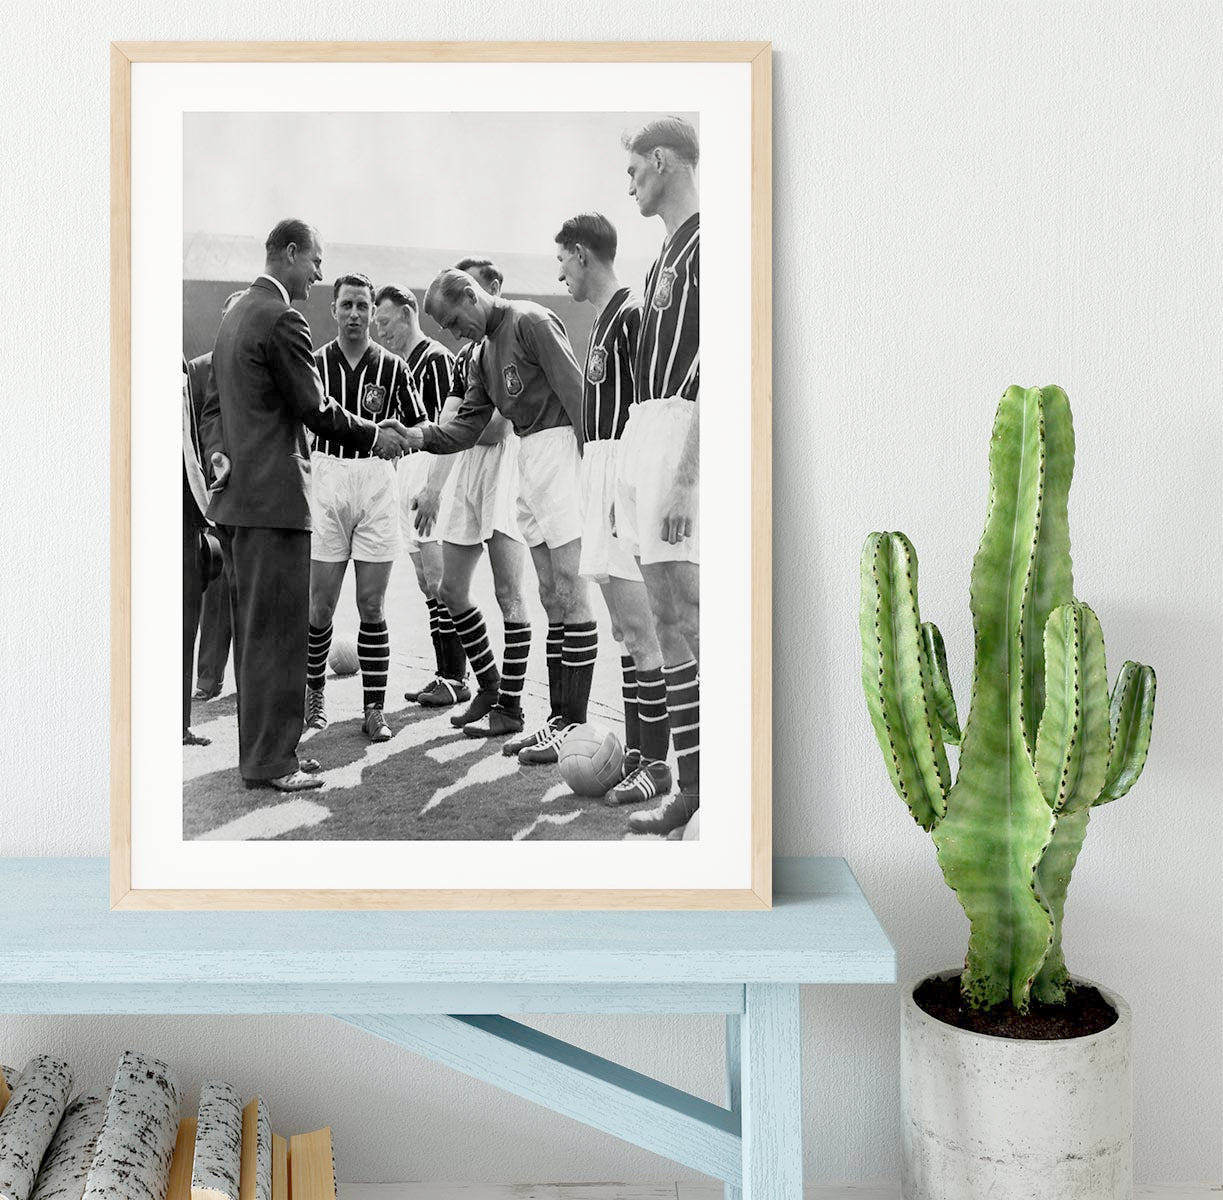 Prince Philip meeting members of Manchester City team Framed Print - Canvas Art Rocks - 3